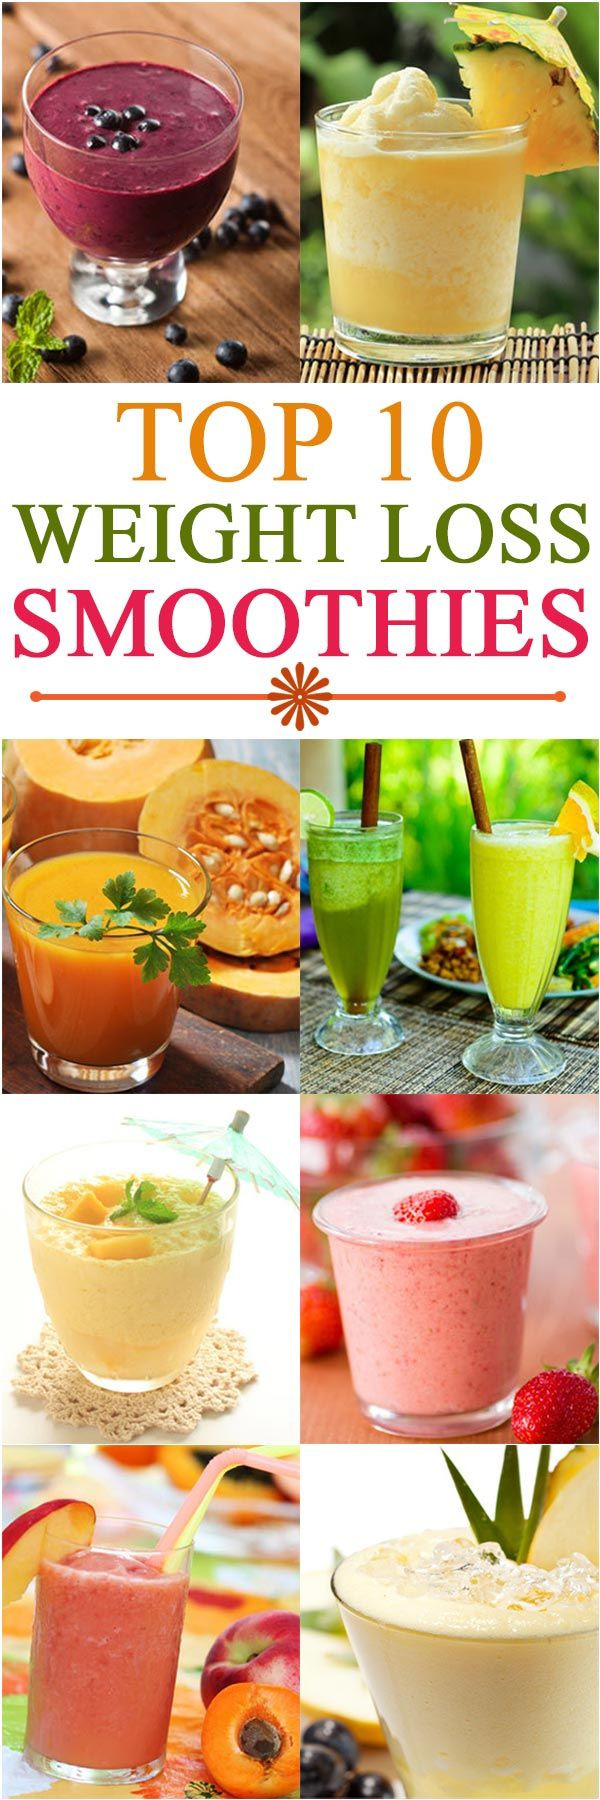 Weight Loss Smoothies And Shakes
 21 Weight Loss Smoothies With Recipes